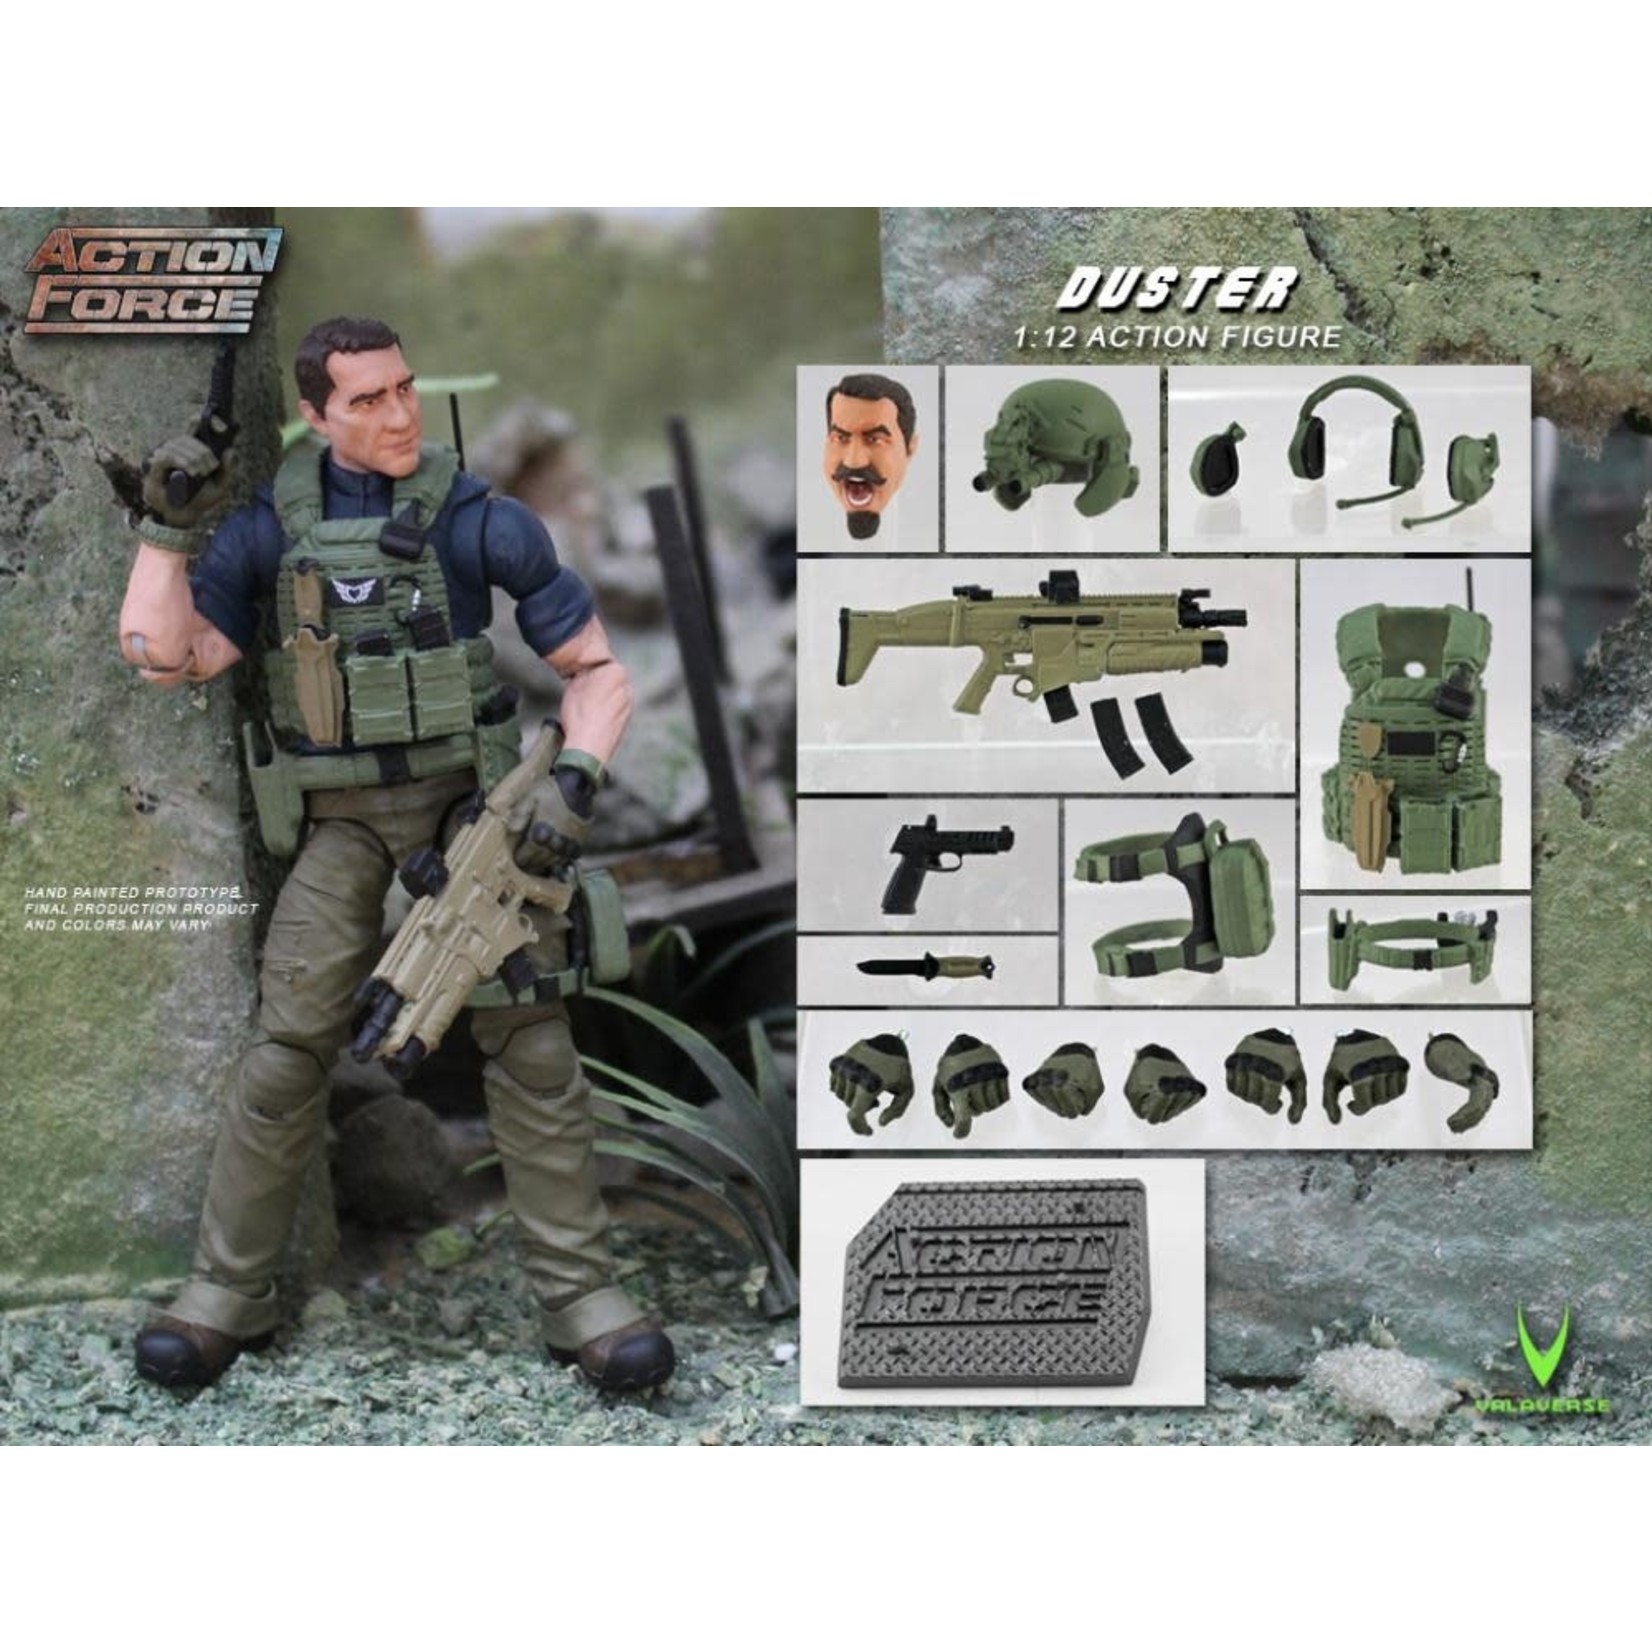 Valaverse Valaverse Action Force Duster (Tim Kennedy) 1/12 Scale Action Figure - Series 2